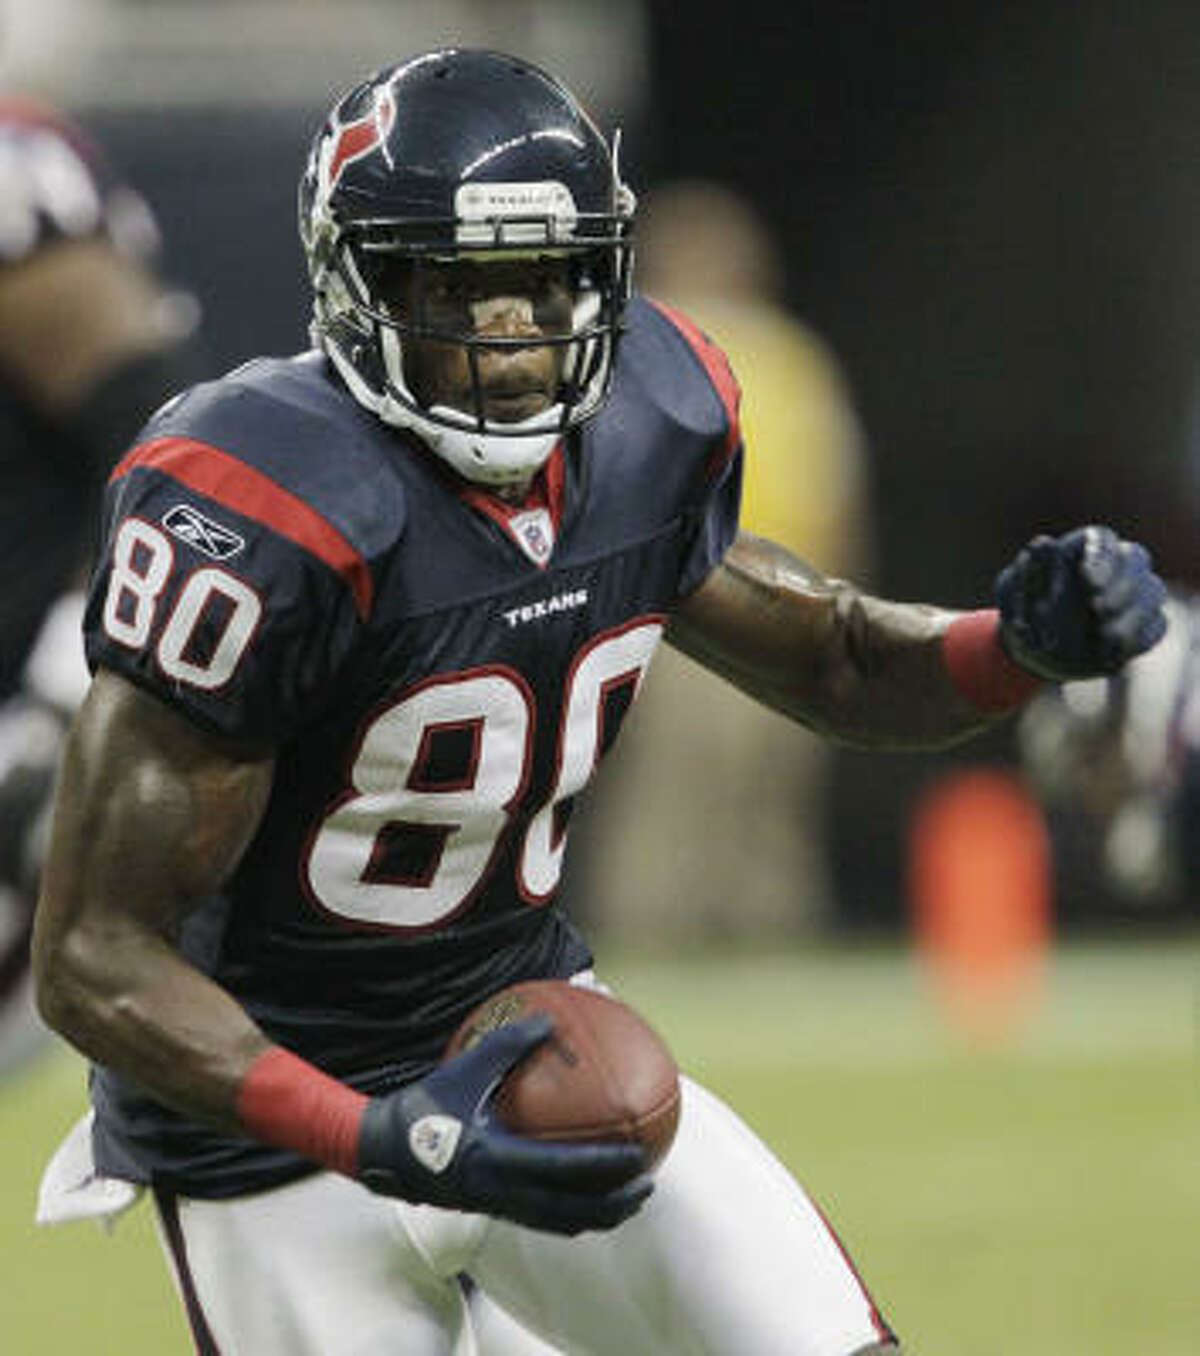 Wide receiver Andre Johnson tops the depth chart at his position.